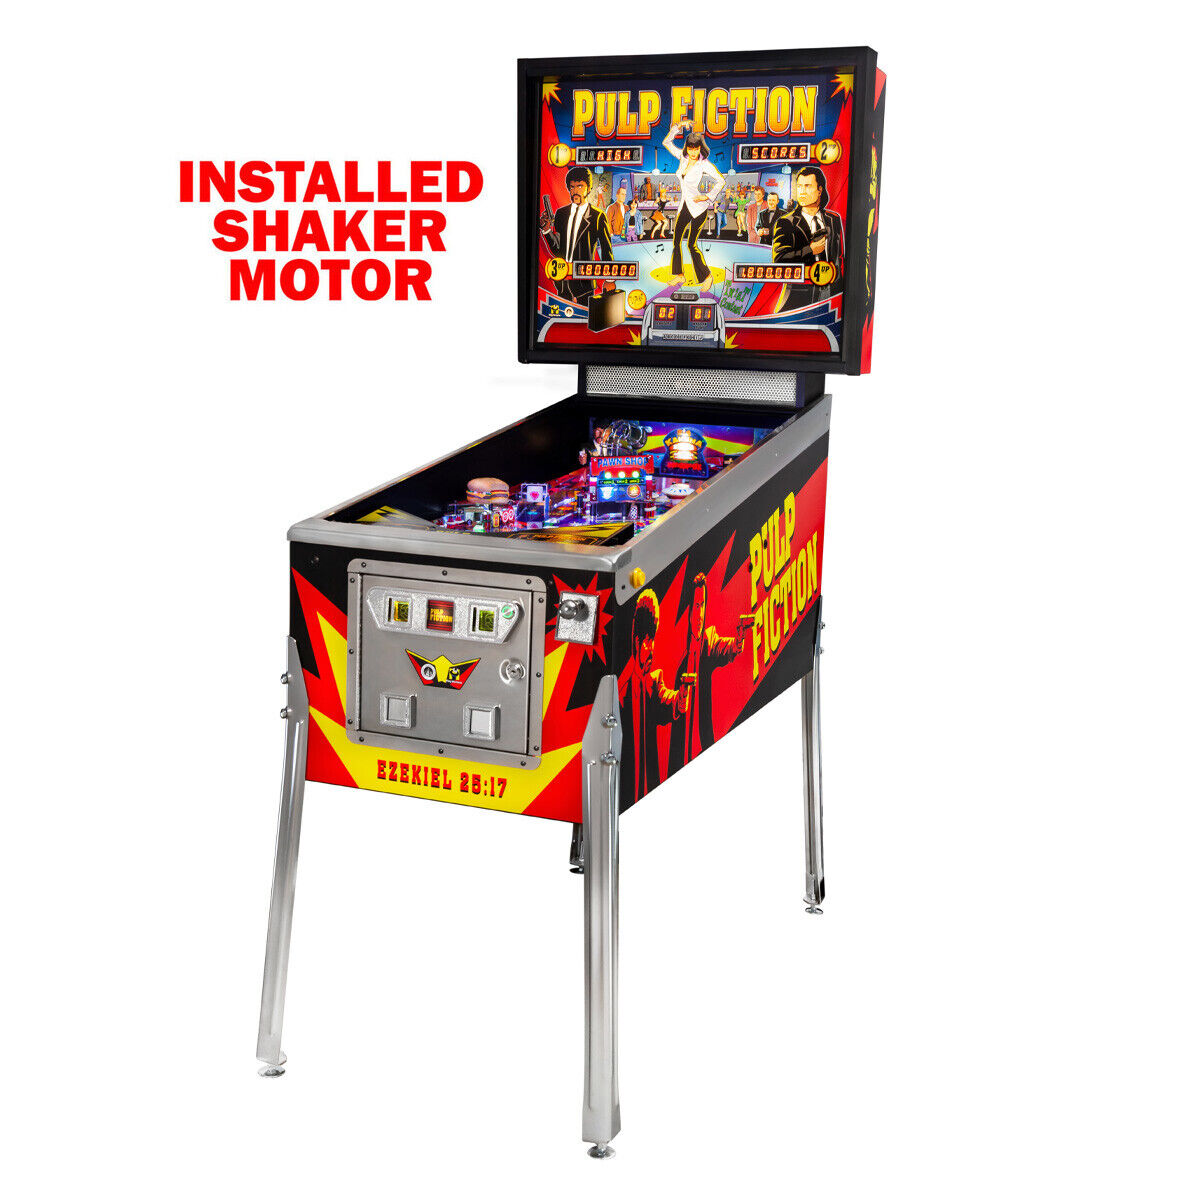 Chicago Gaming Pulp Fiction Pinball Machine - 21000-SE Special Edition - Shaker